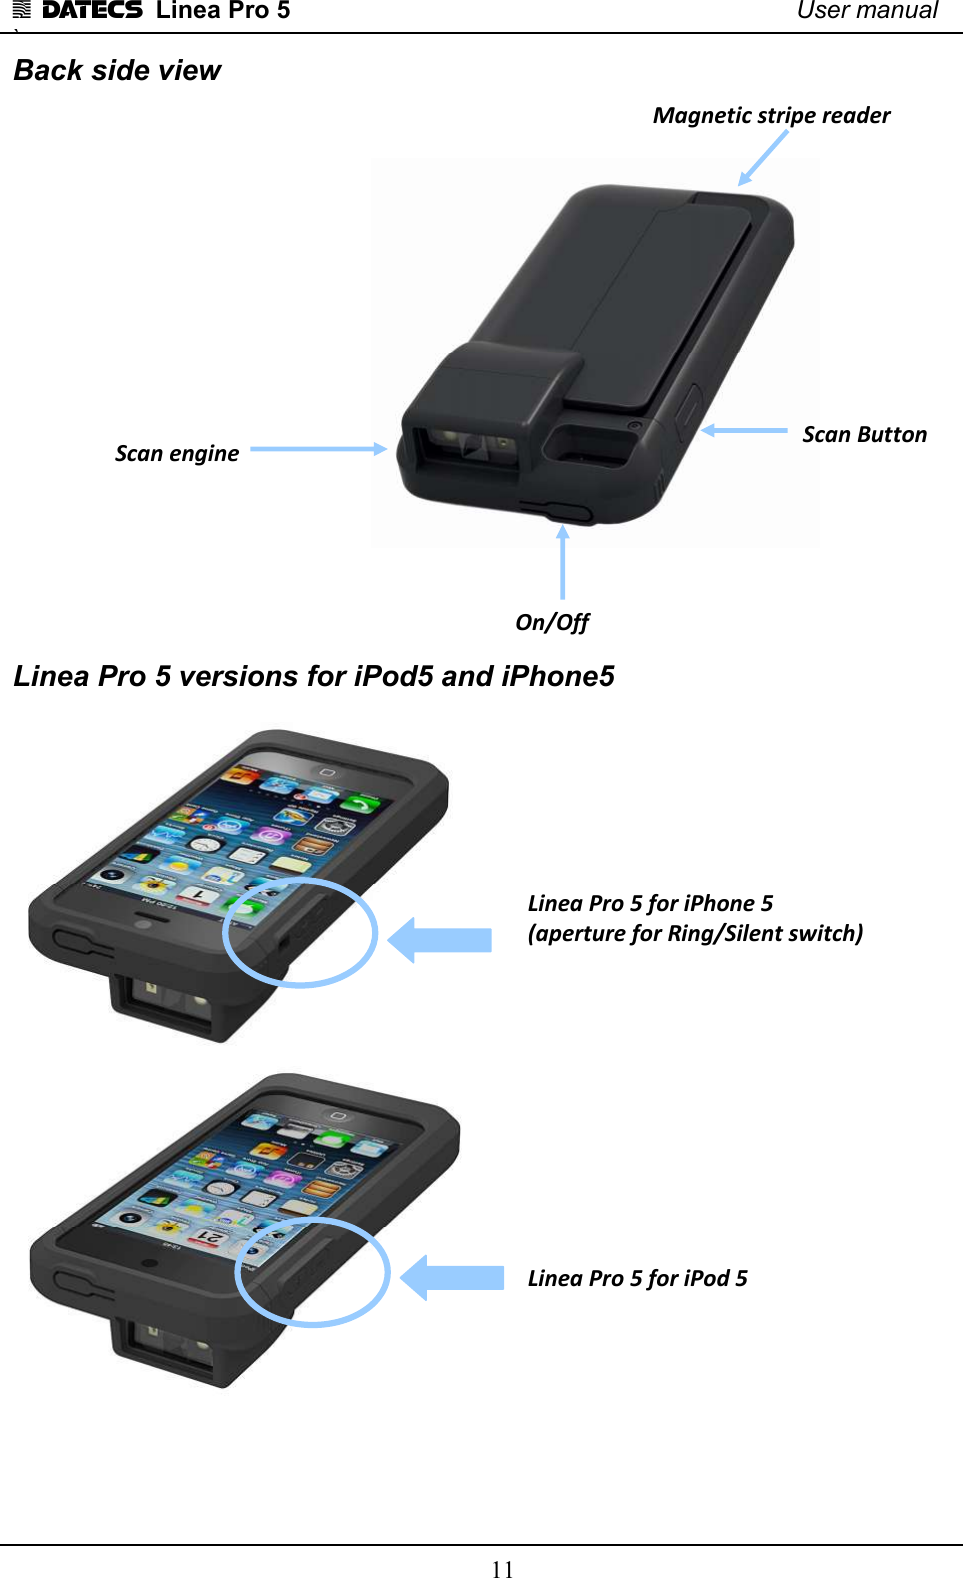 1 DATECS  Linea Pro 5    User manual `    11 Back side view Linea Pro 5 versions for iPod5 and iPhone5  Linea Pro 5 for iPhone 5 (aperture for Ring/Silent switch) Linea Pro 5 for iPod 5 Scan engine On/Off  Scan Button  Magnetic stripe reader  